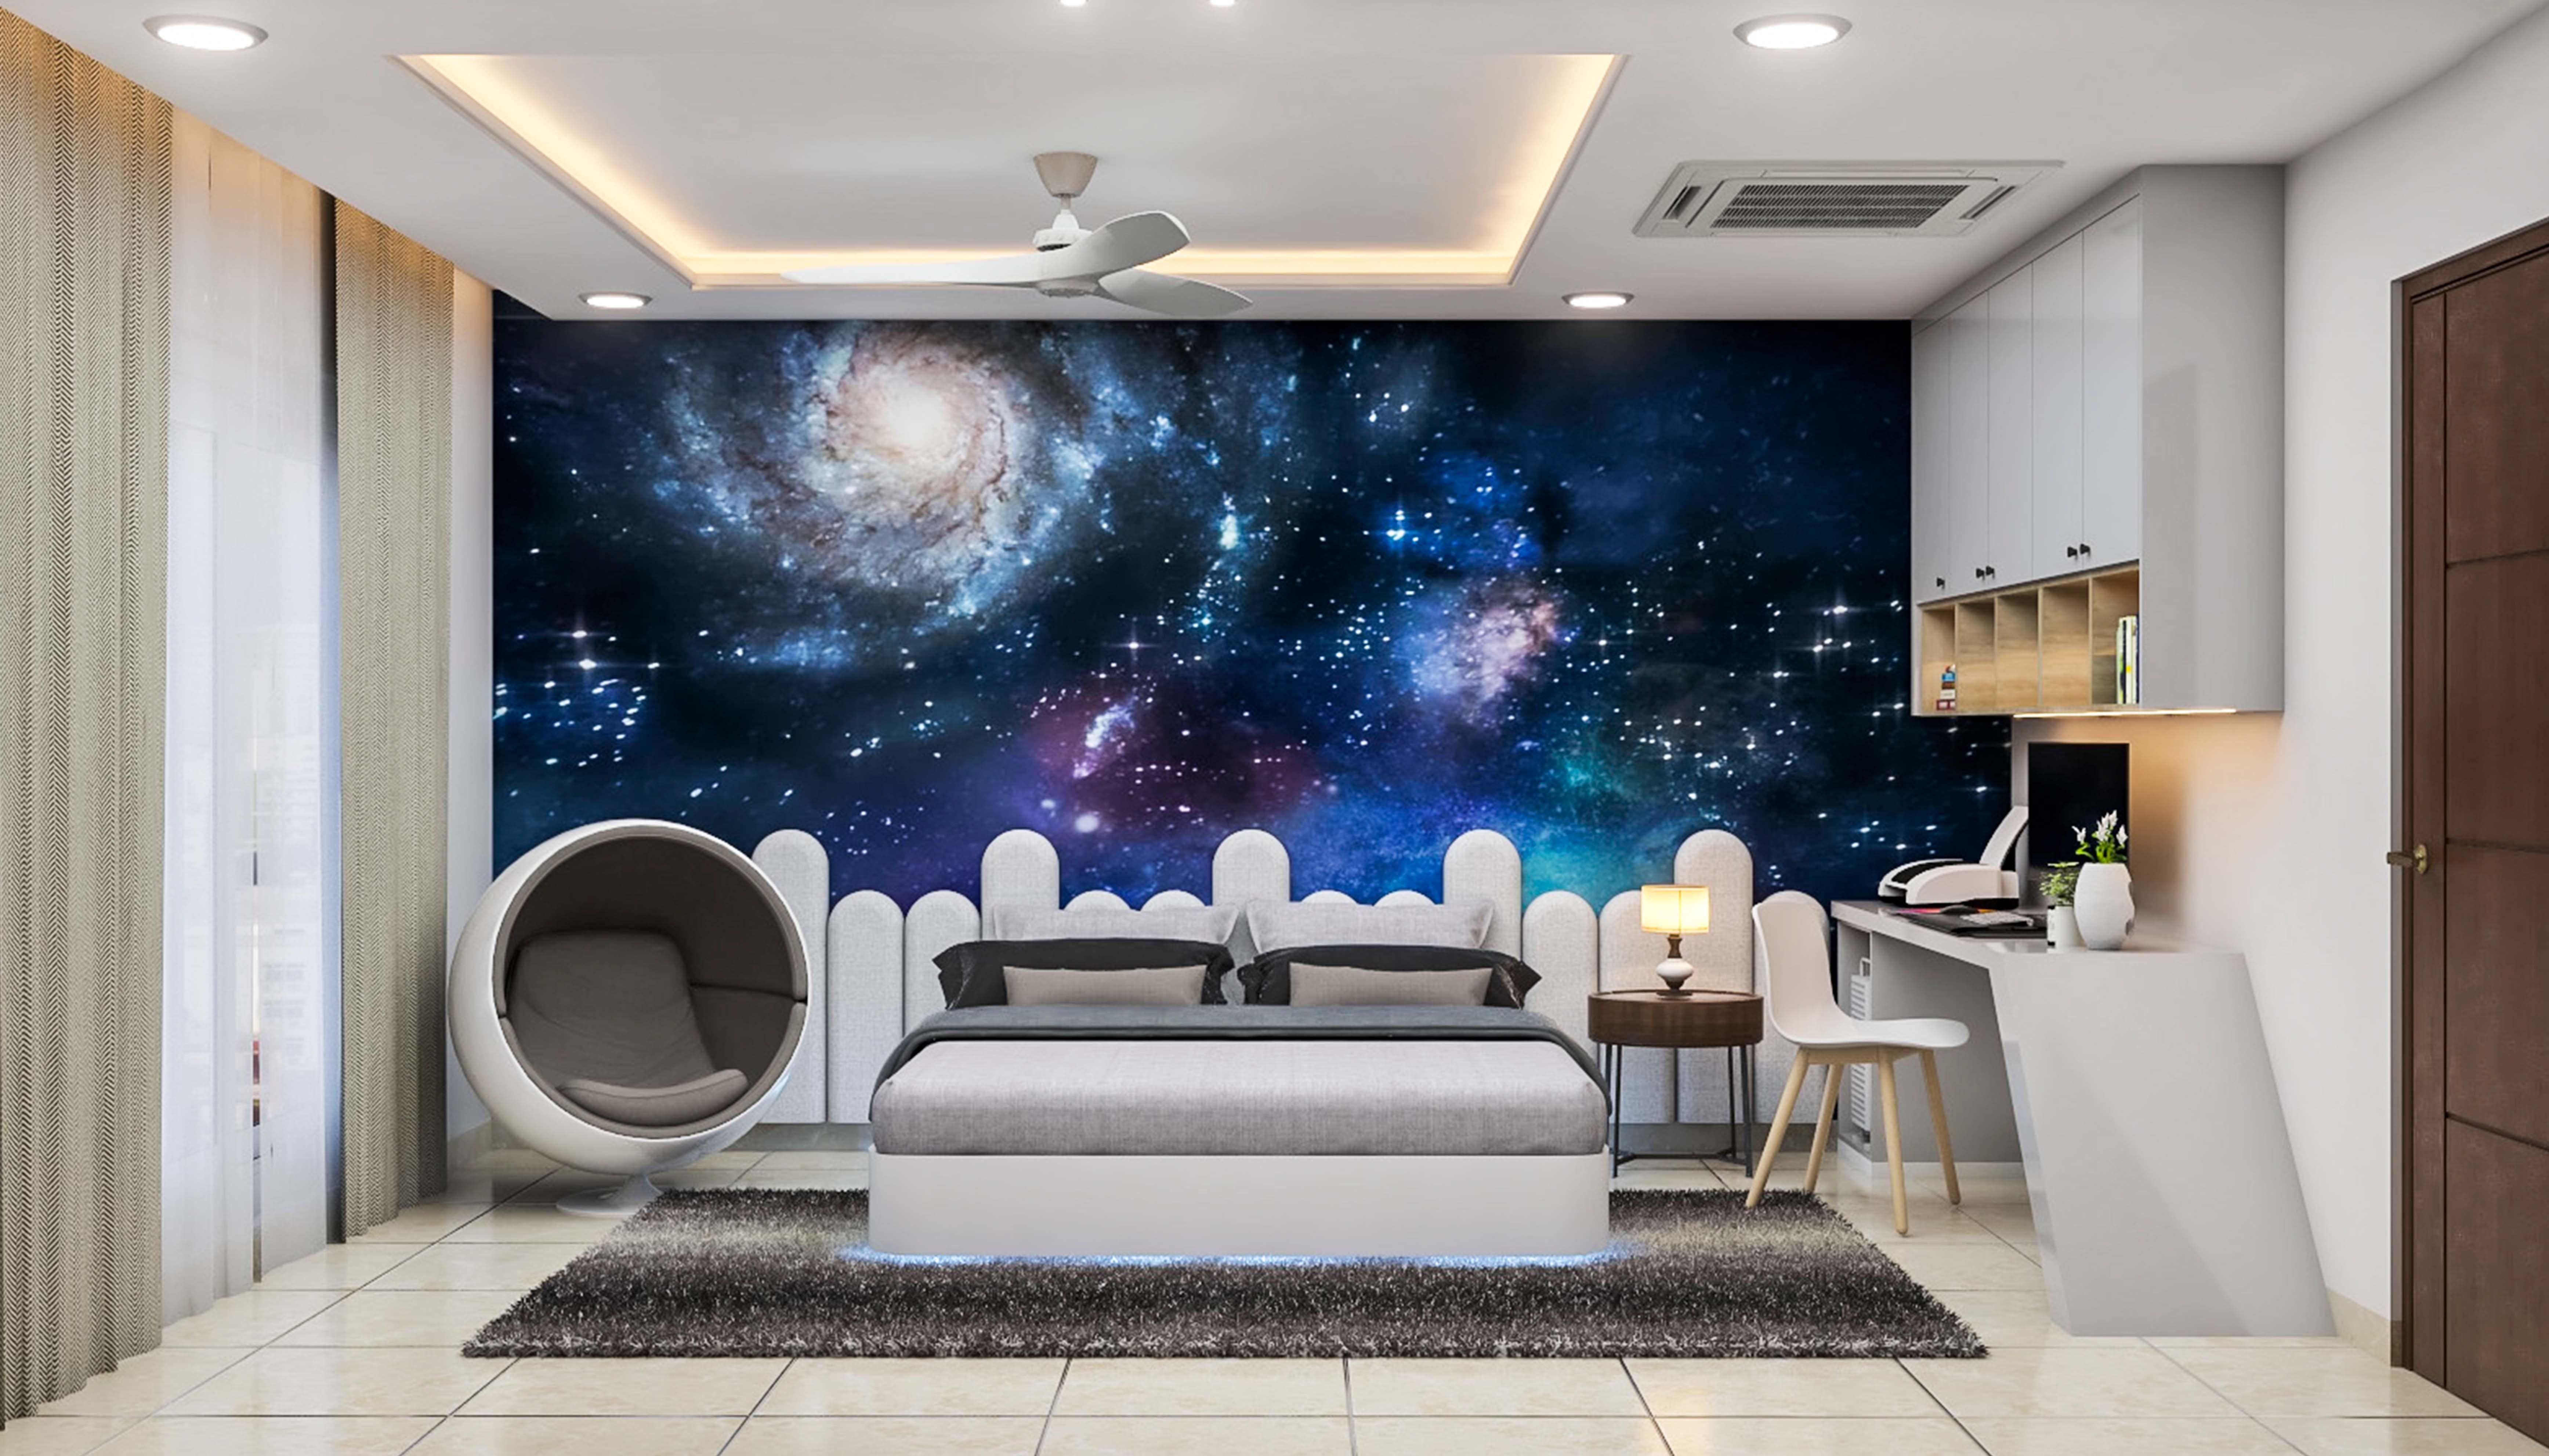 Spacious Boy's Room Design With Space Wallpaper